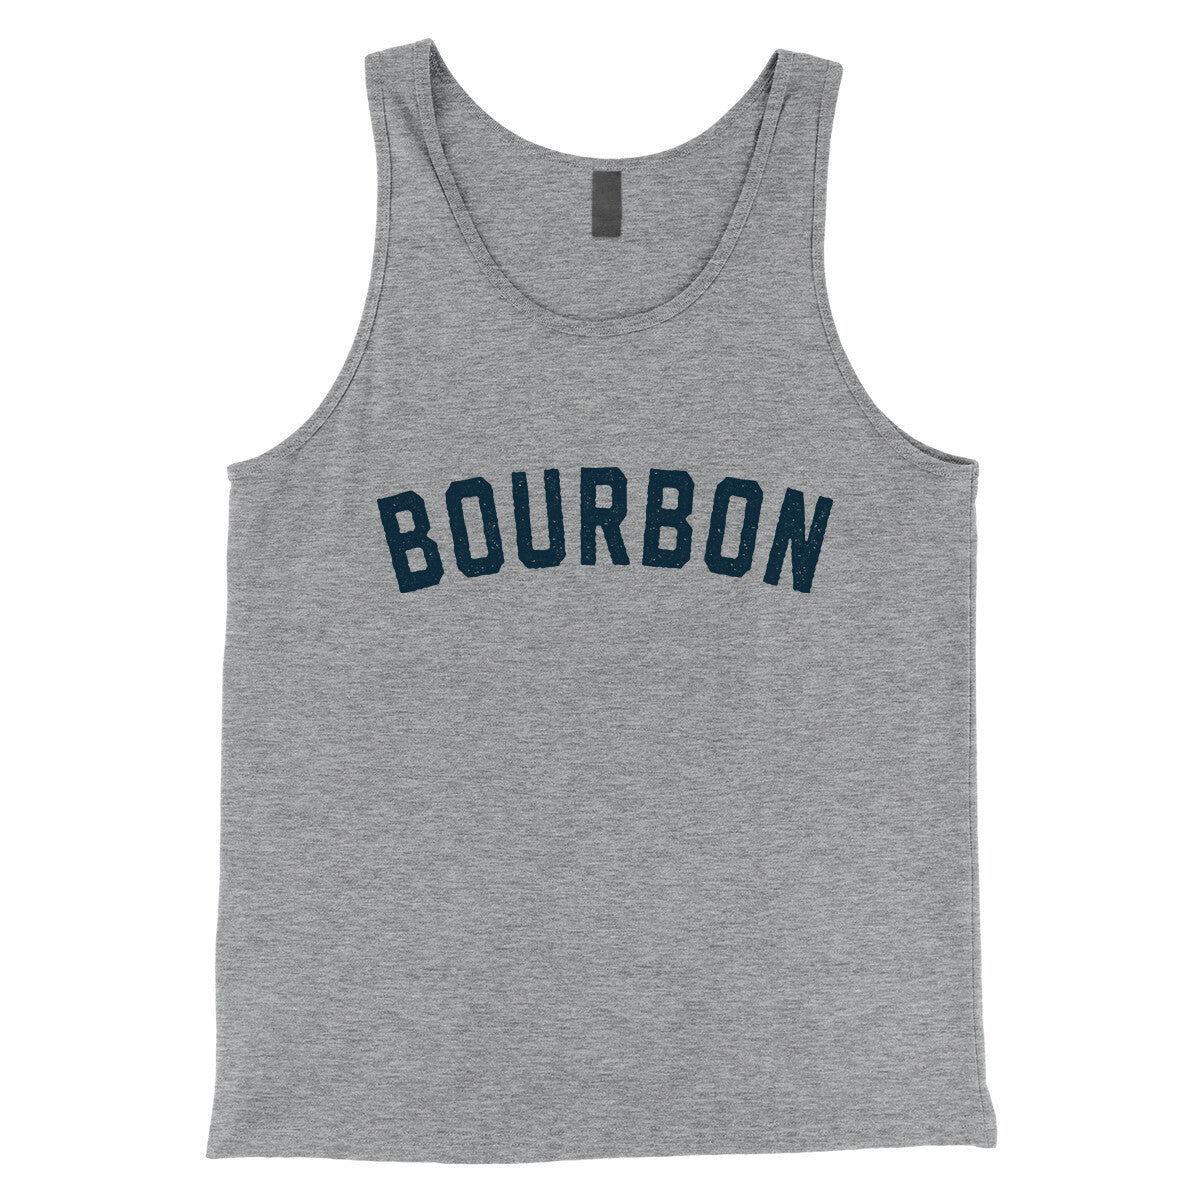 Bourbon in Athletic Heather Color